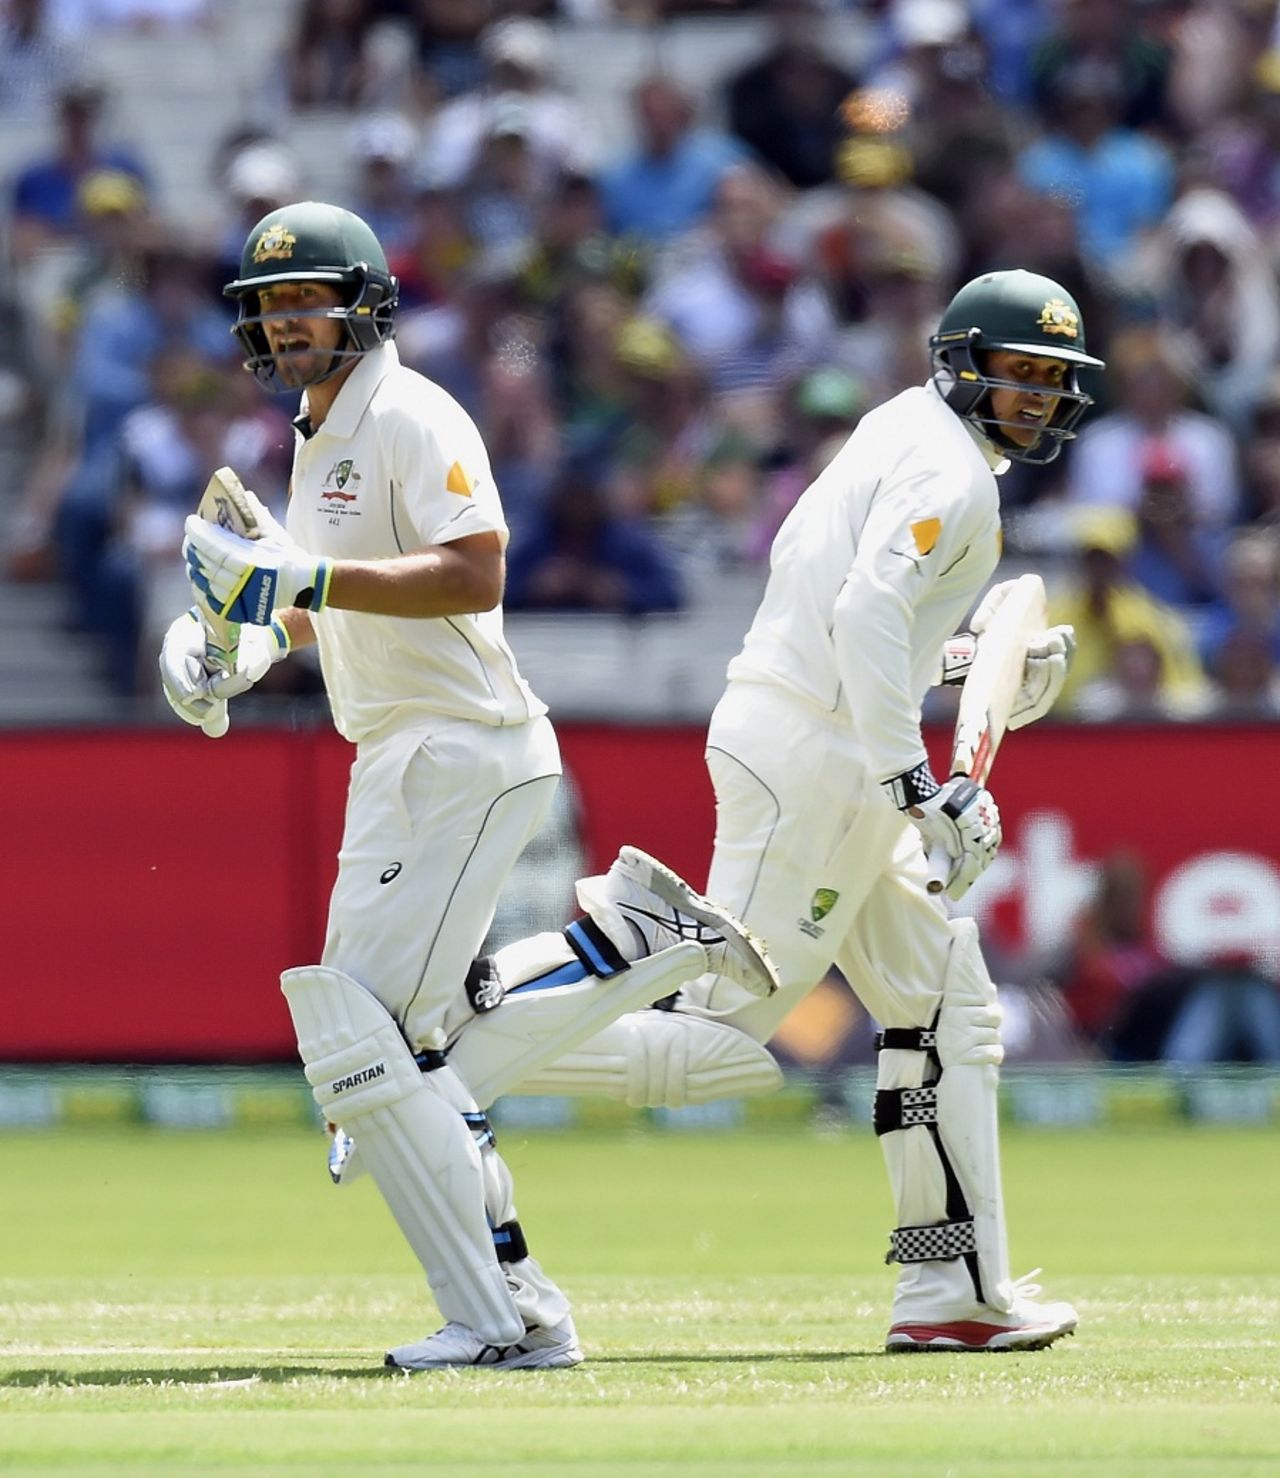 Usman Khawaja and Joe Burns complete a run during their partnership, Australia v West Indies, 2nd Test, 1st day, Melbourne, December 26, 2015